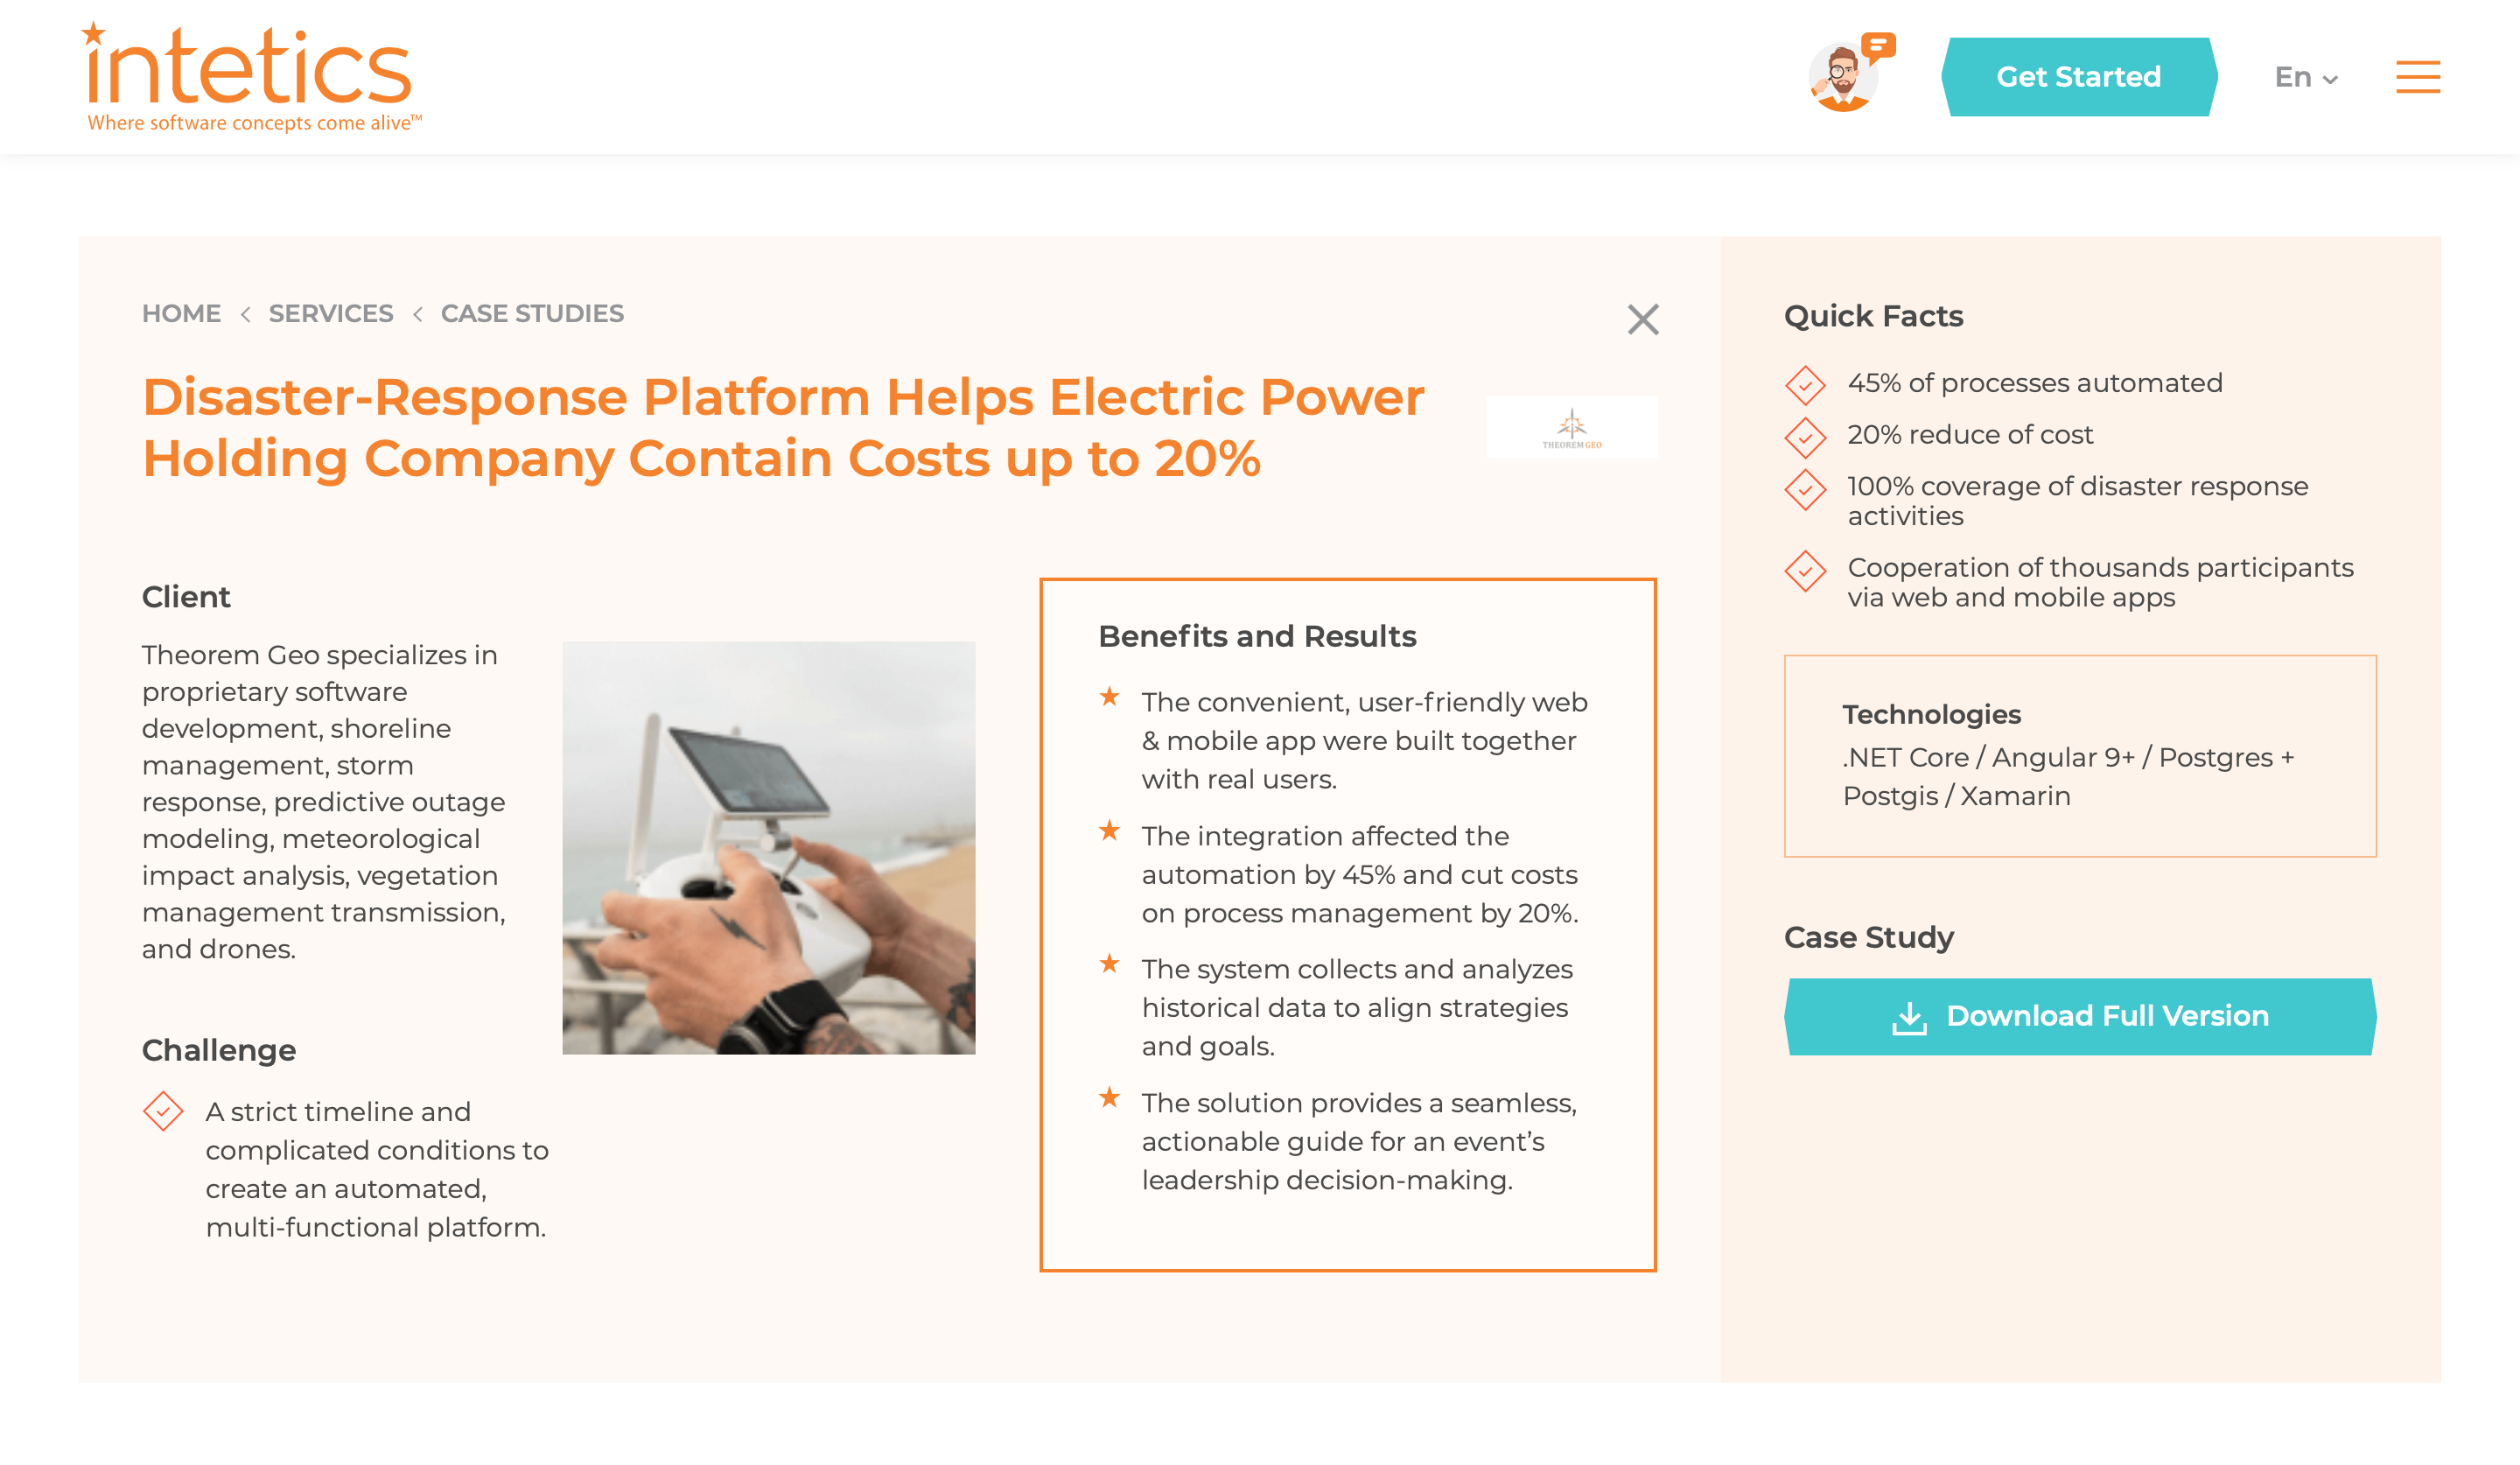 Disaster-Response Platform Helps Electric Power Holding Company Contain Costs up to 20